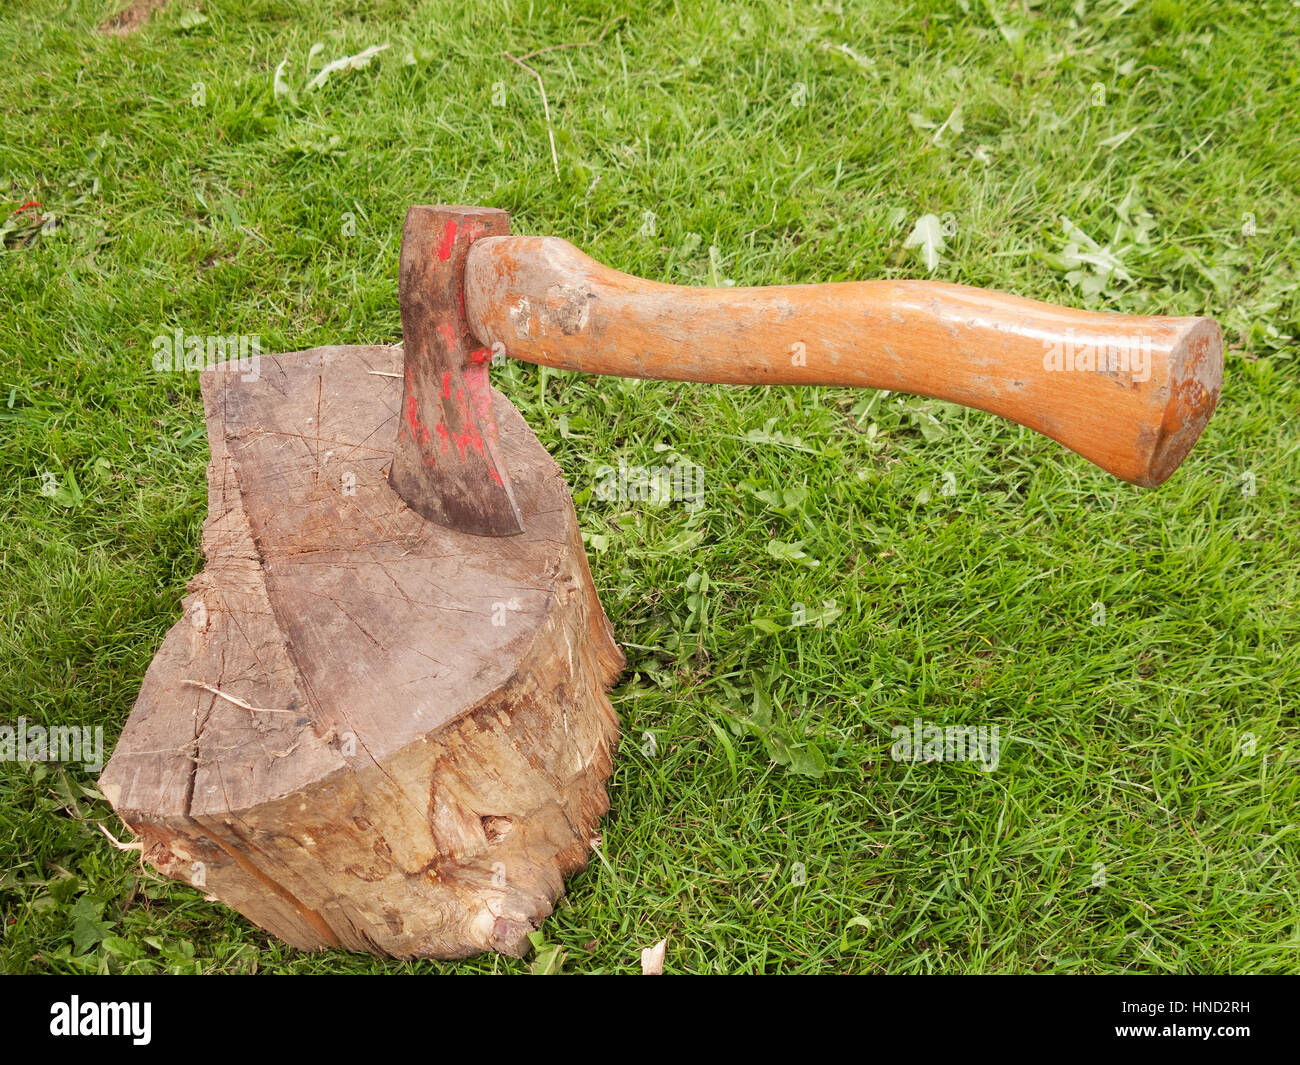 A large axe embedded in wooden block. Stock Photo